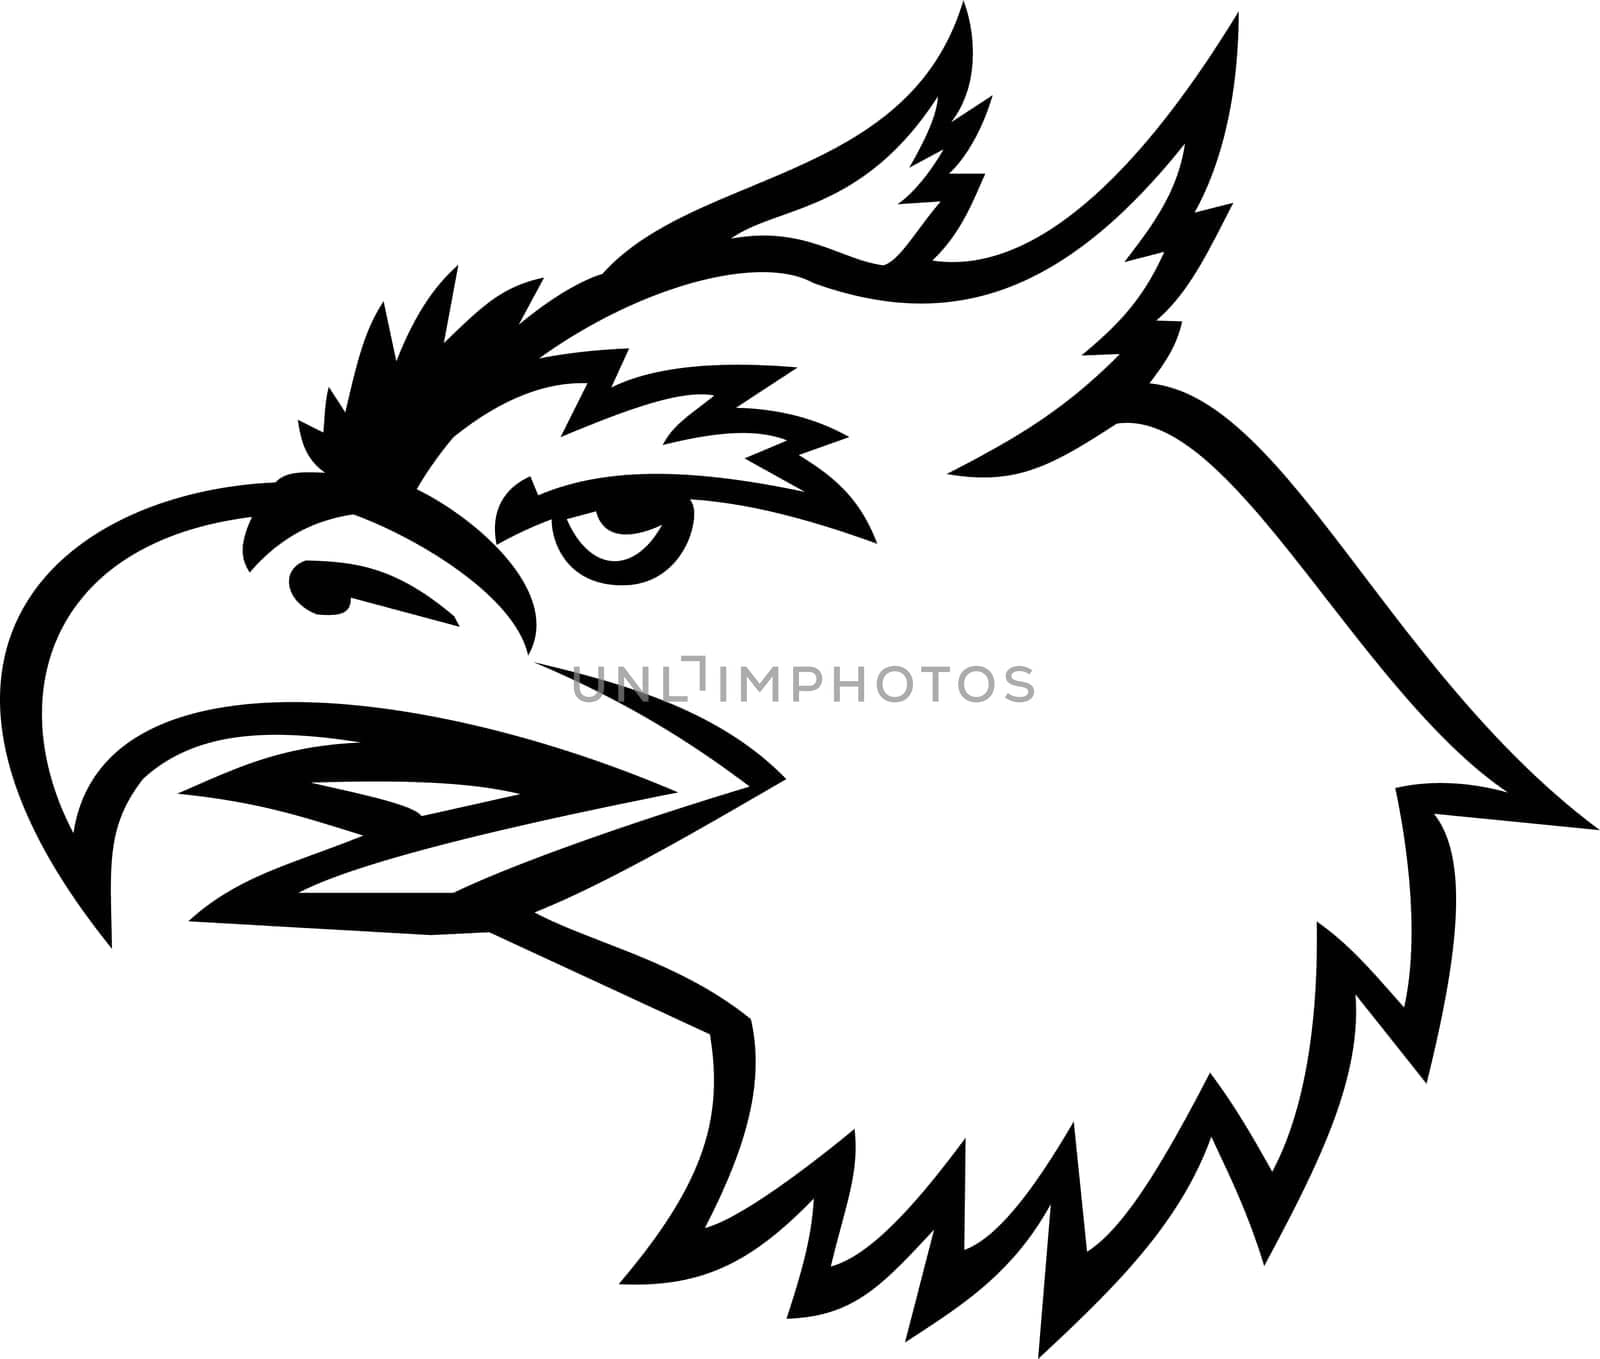 Mascot illustration of head of a head of a roc, an enormous legendary bird of prey in the popular mythology of the Middle East viewed from side on isolated background in retro style.